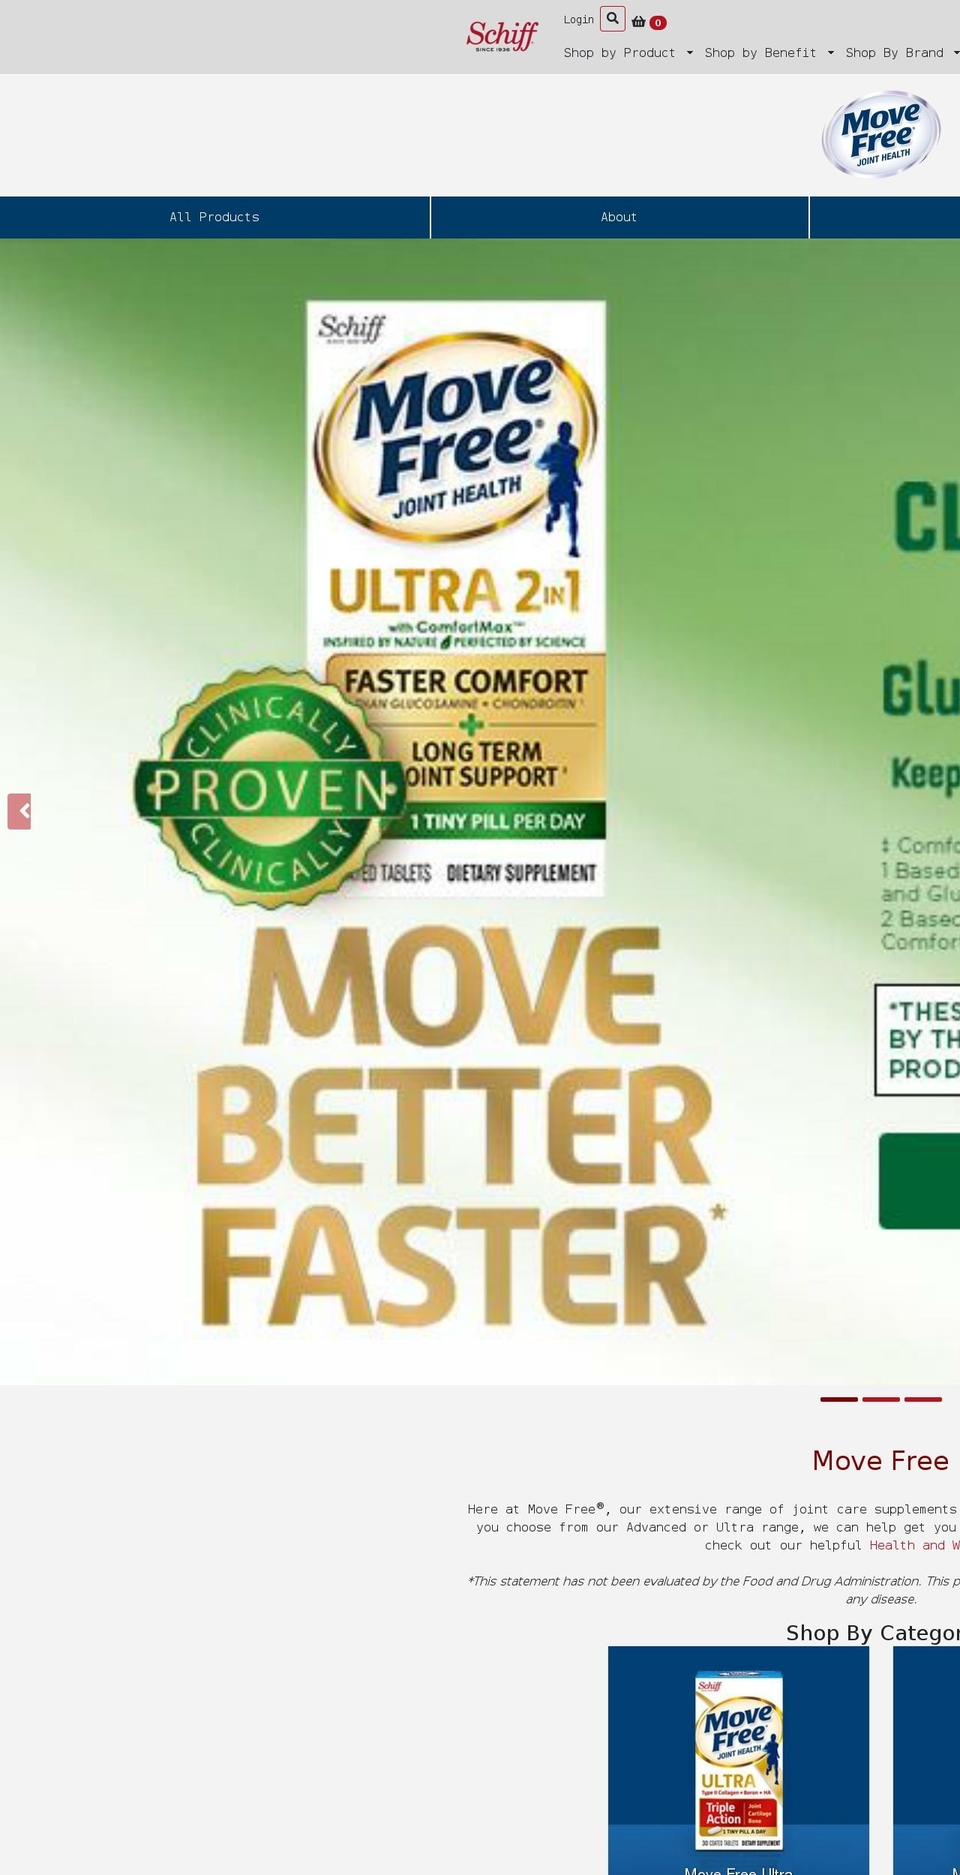 Schiff Vitamins - Updated 8\/3 Shopify theme site example move-free.org